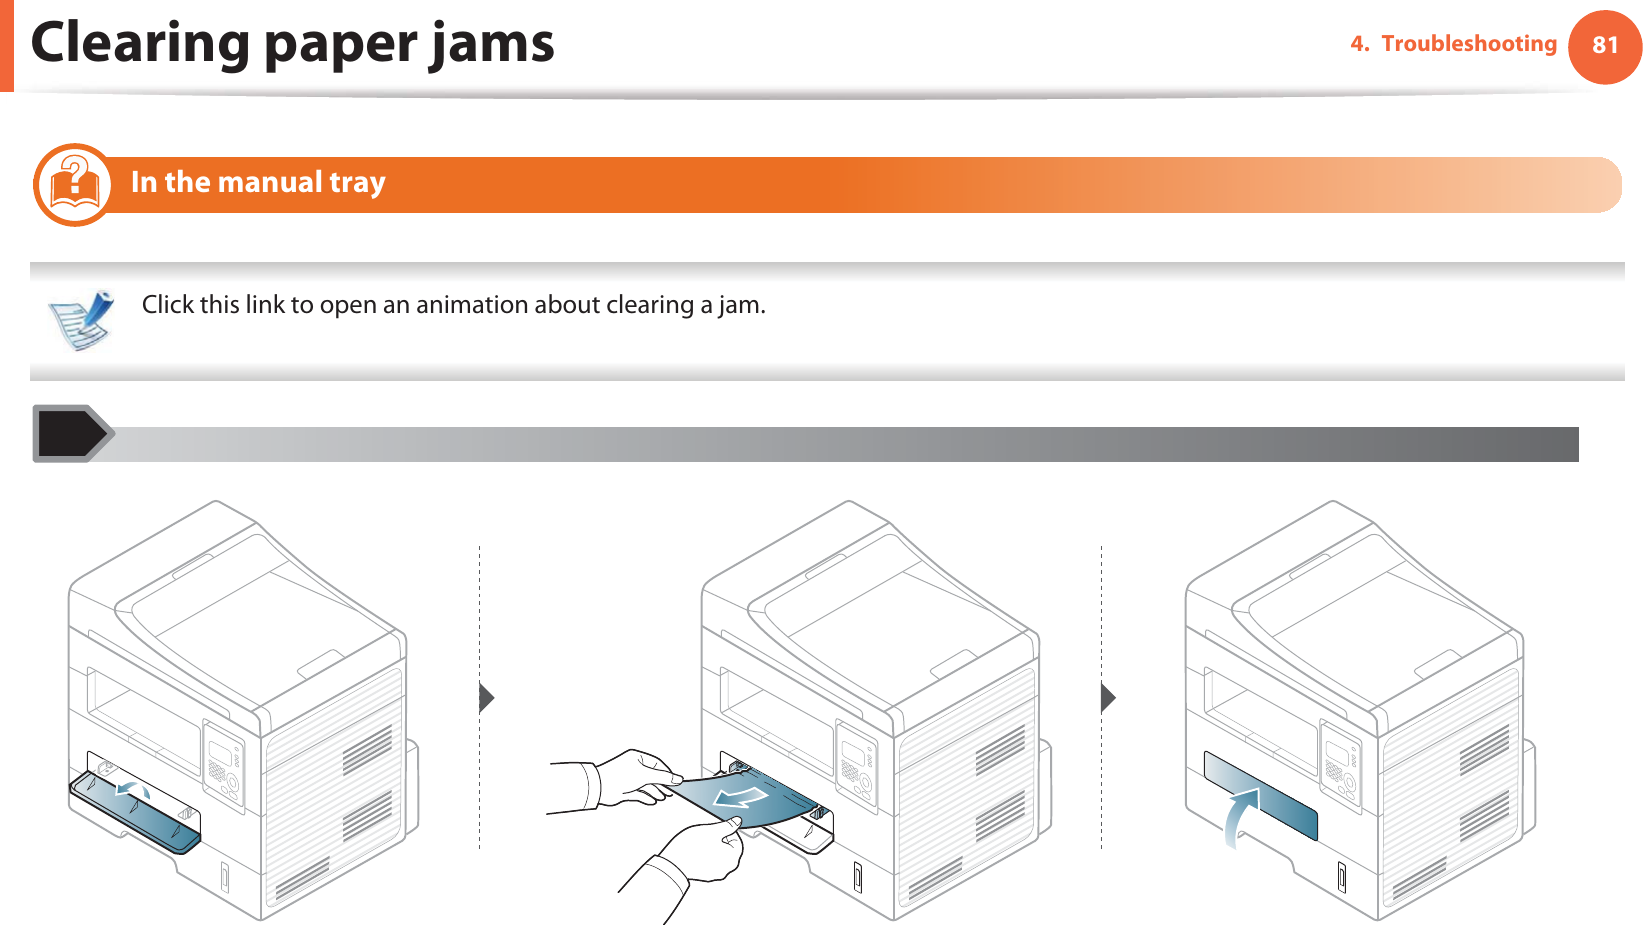 Clearing paper jams 814. Troubleshooting5 In the manual tray Click this link to open an animation about clearing a jam. 